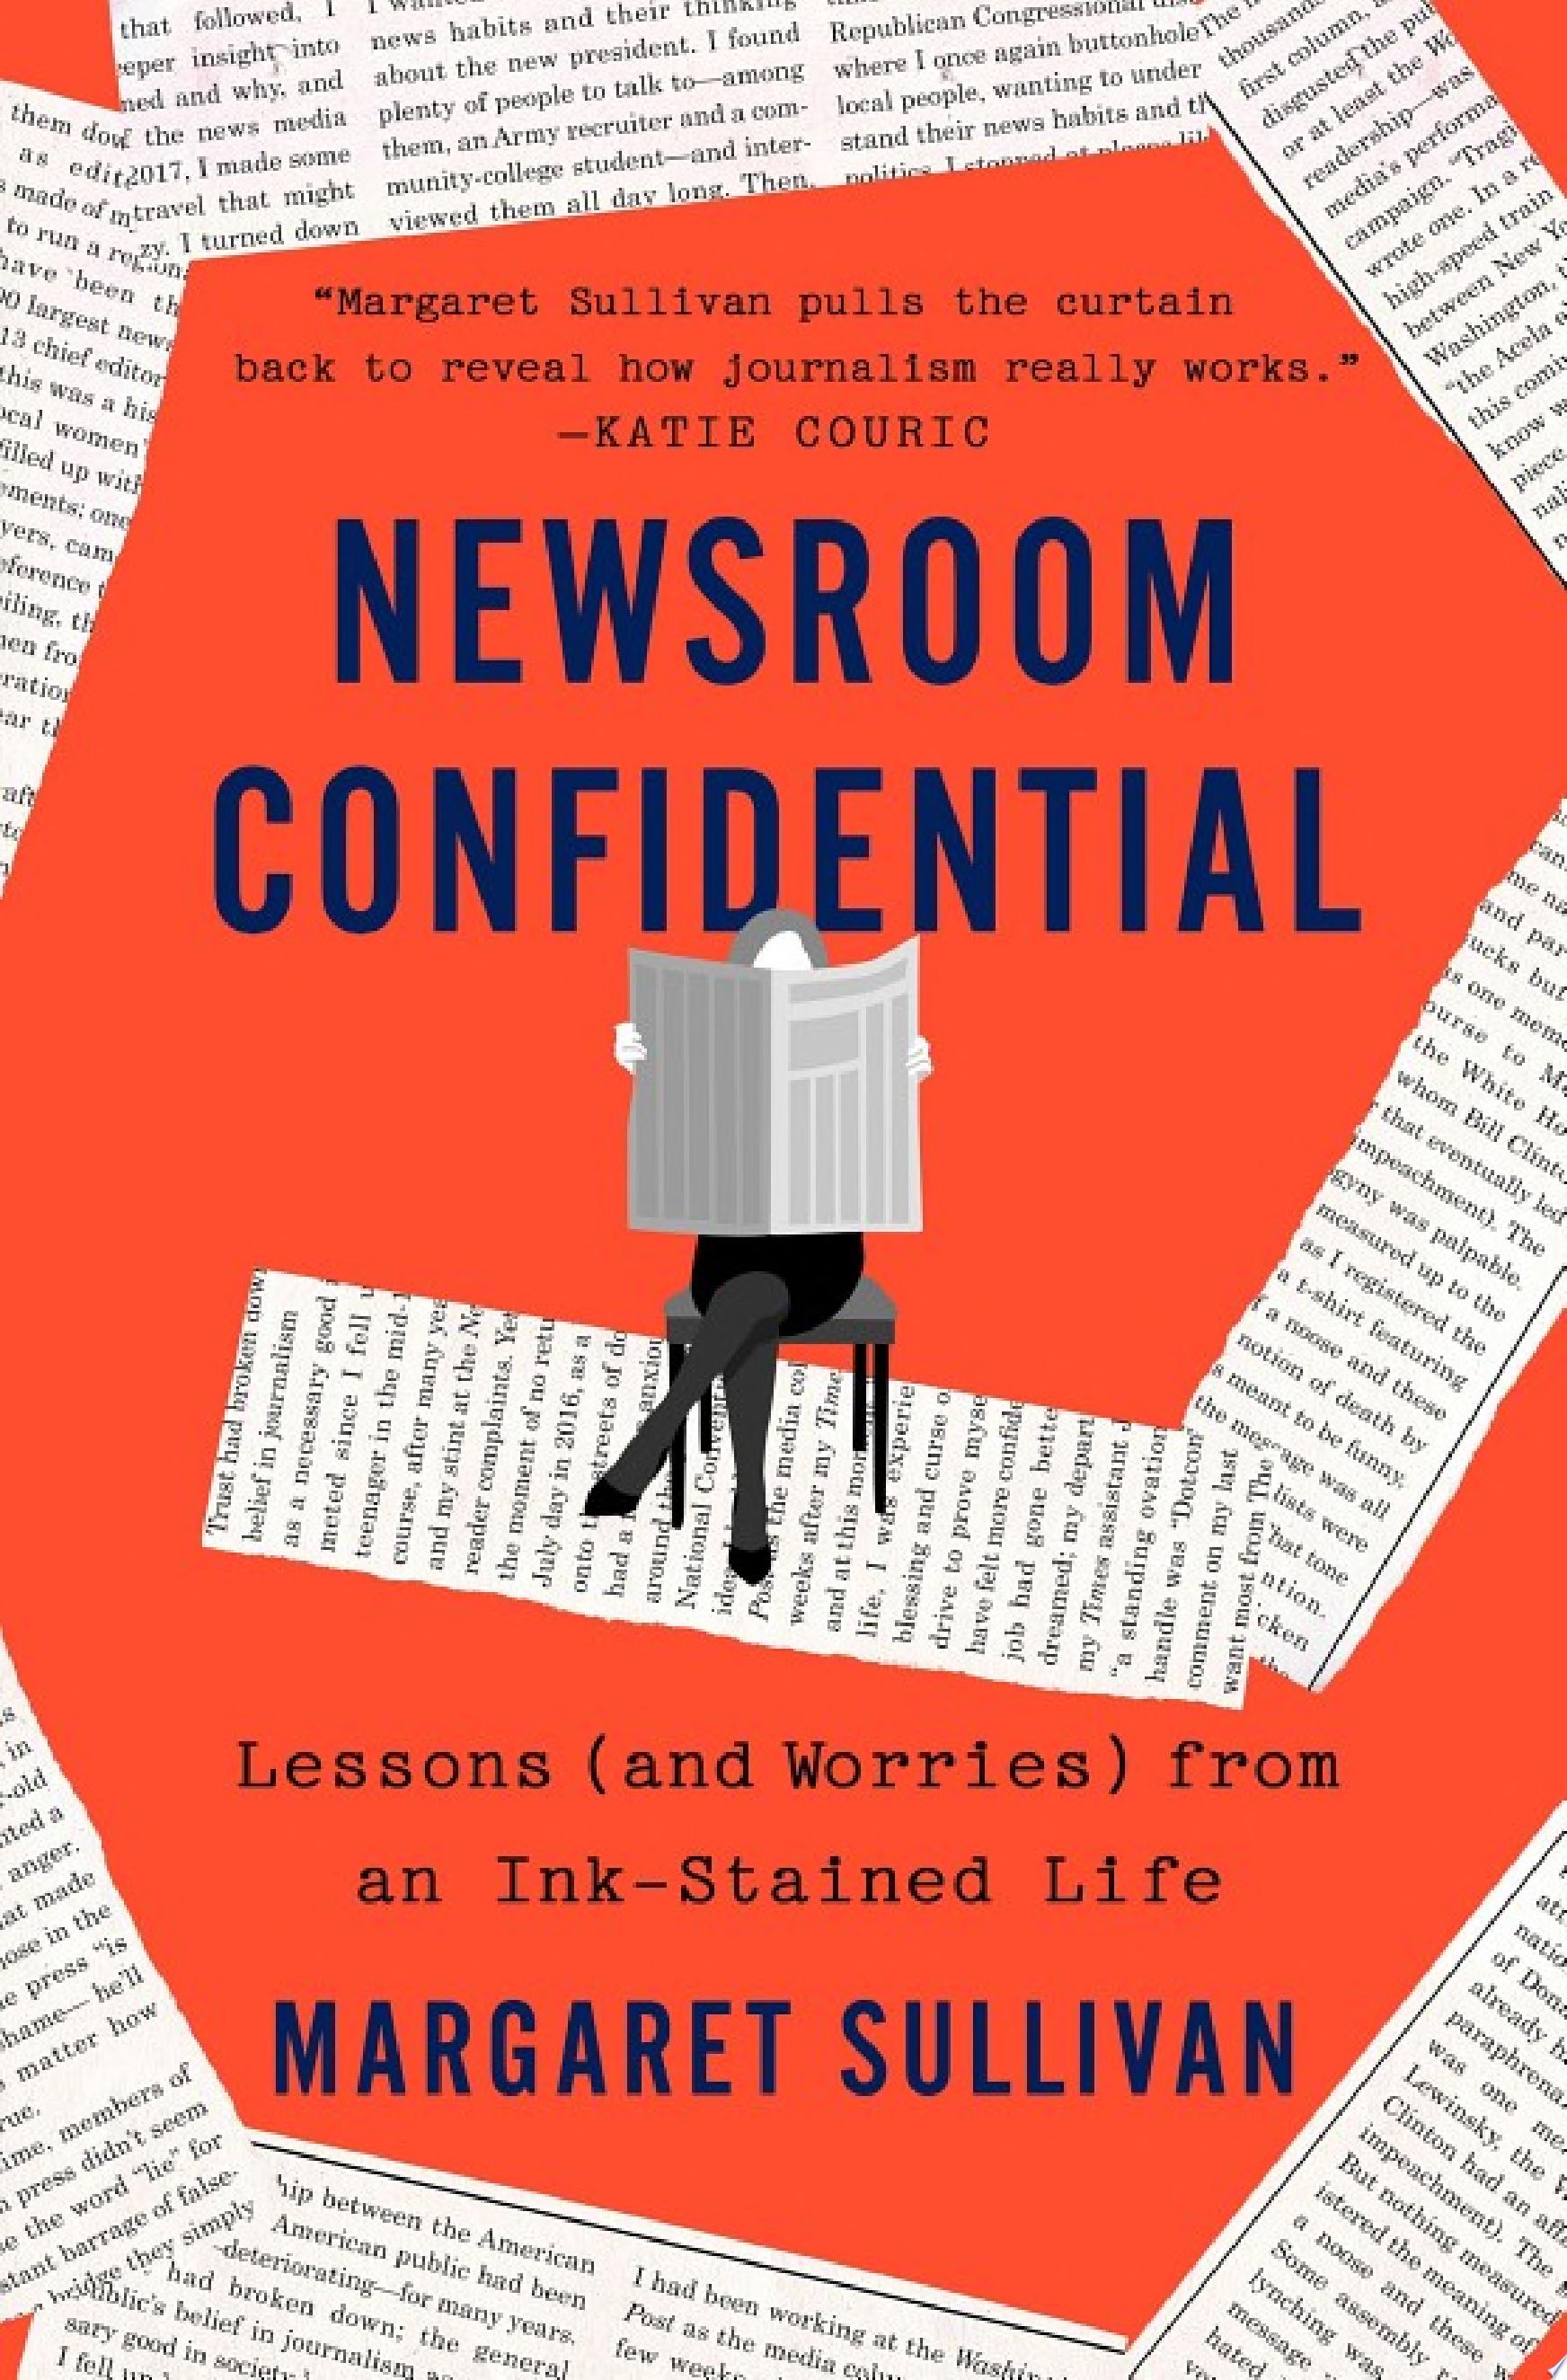 Image for "Newsroom Confidential"